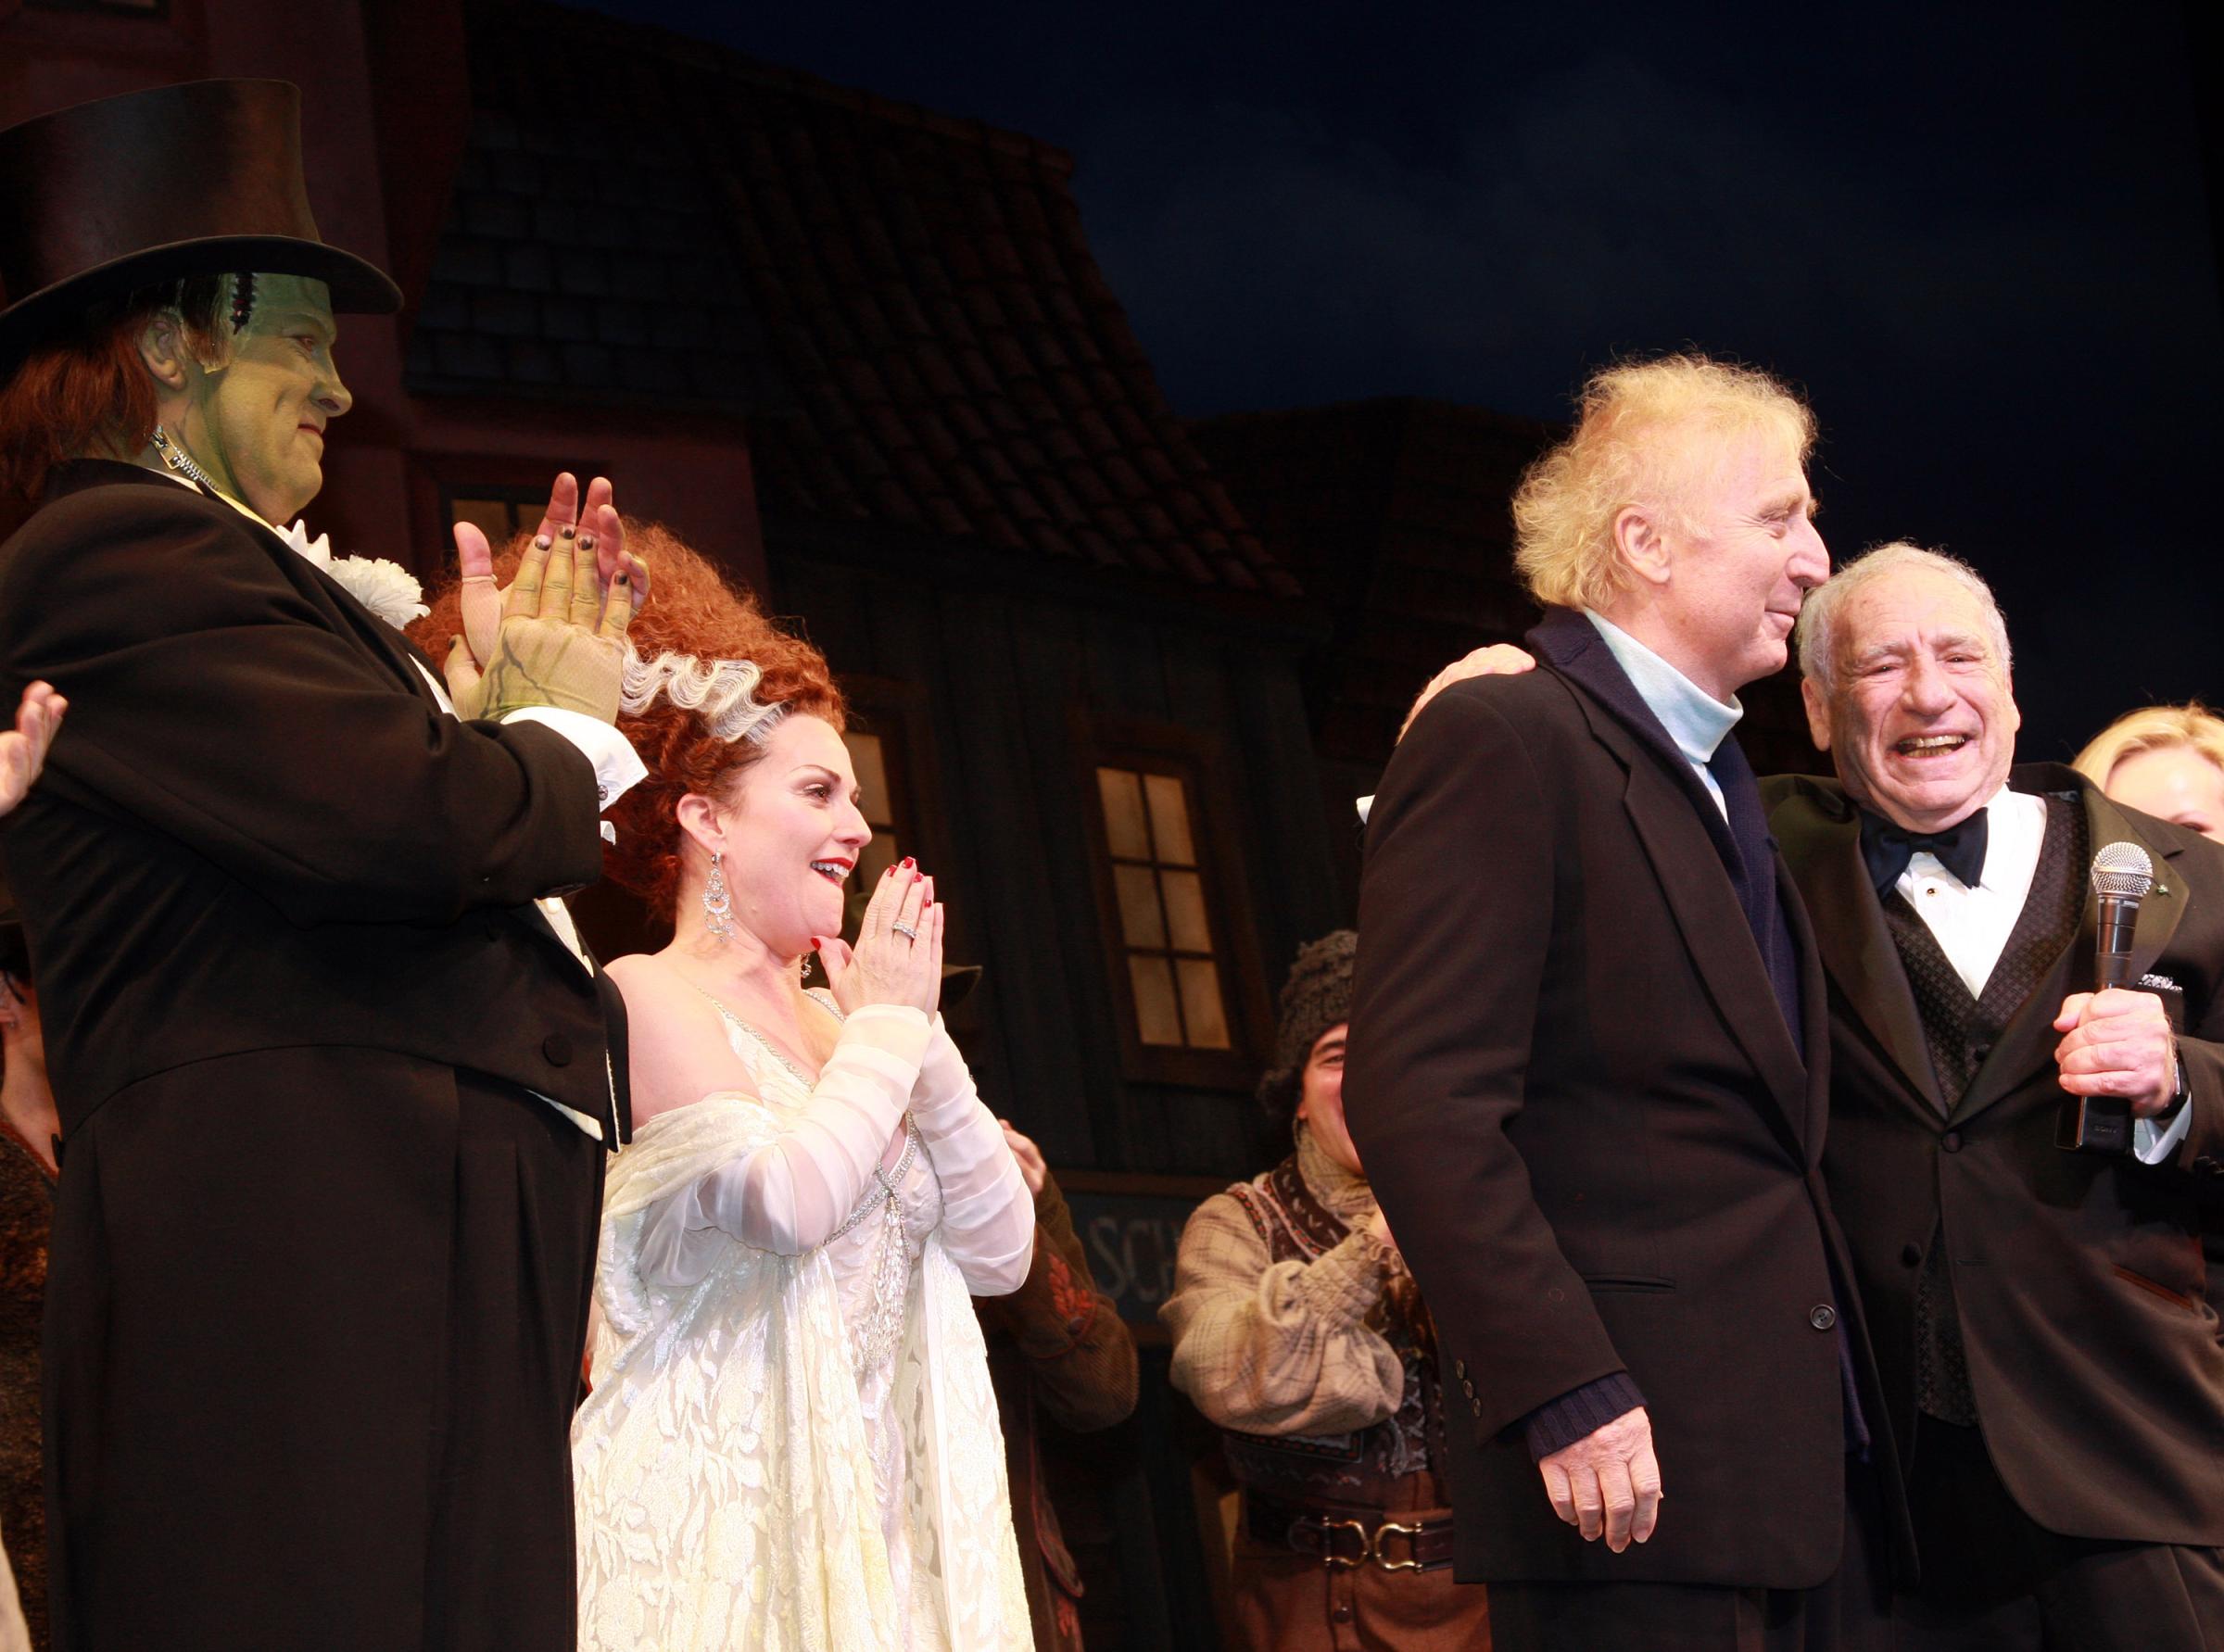 Gene Wilder and Mel Brooks, far right, at the curtain call for Mel Brooks' musical, Young Frankenstein, on Nov. 8, 2007 in New York City.